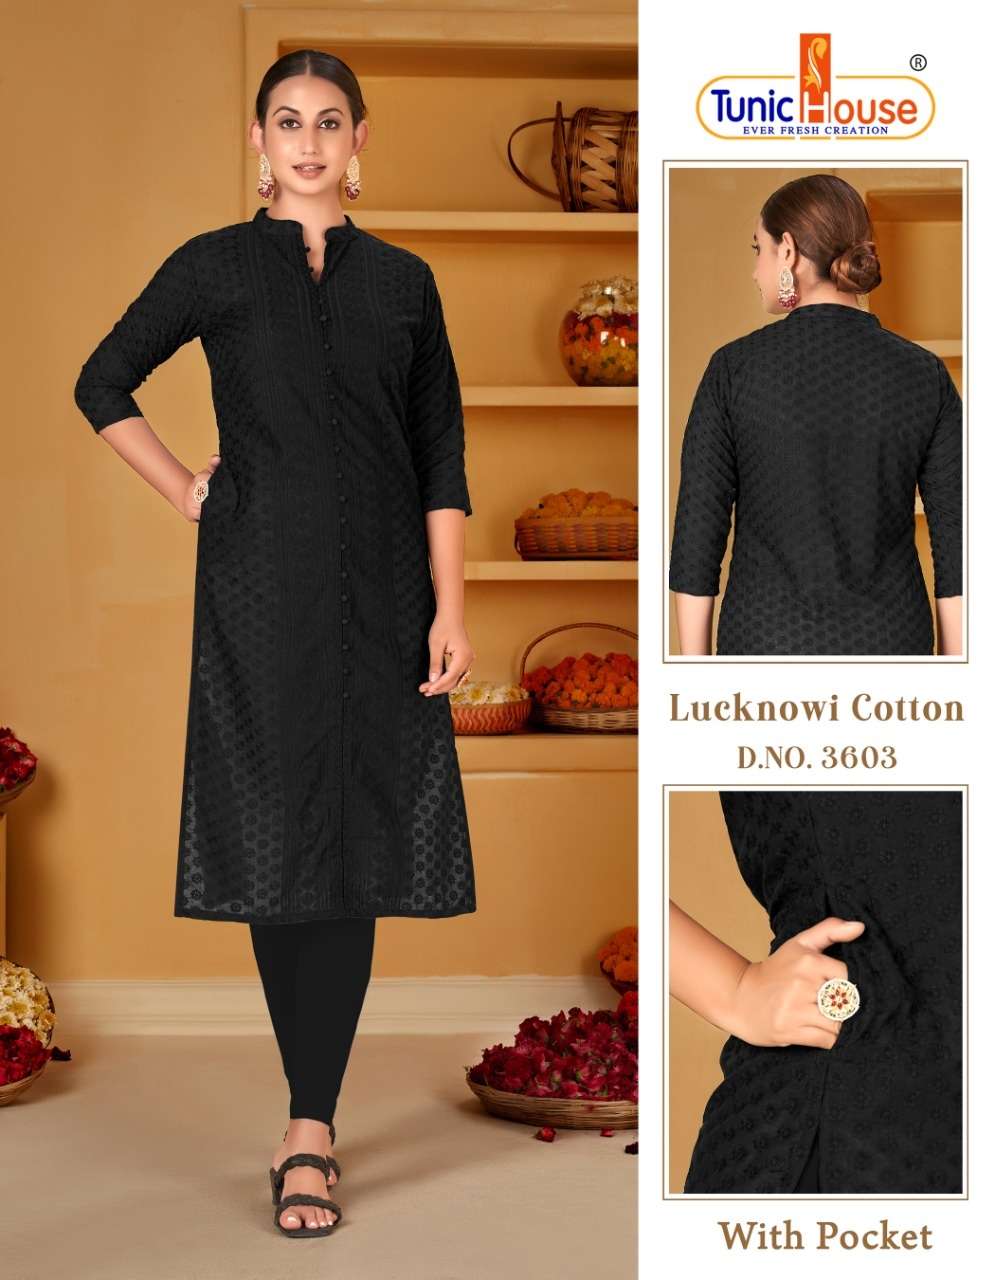 TUNIC HOUSE LUCKNOWI COTTON SUMMER KURTIS COLLECTION AT WHOL...